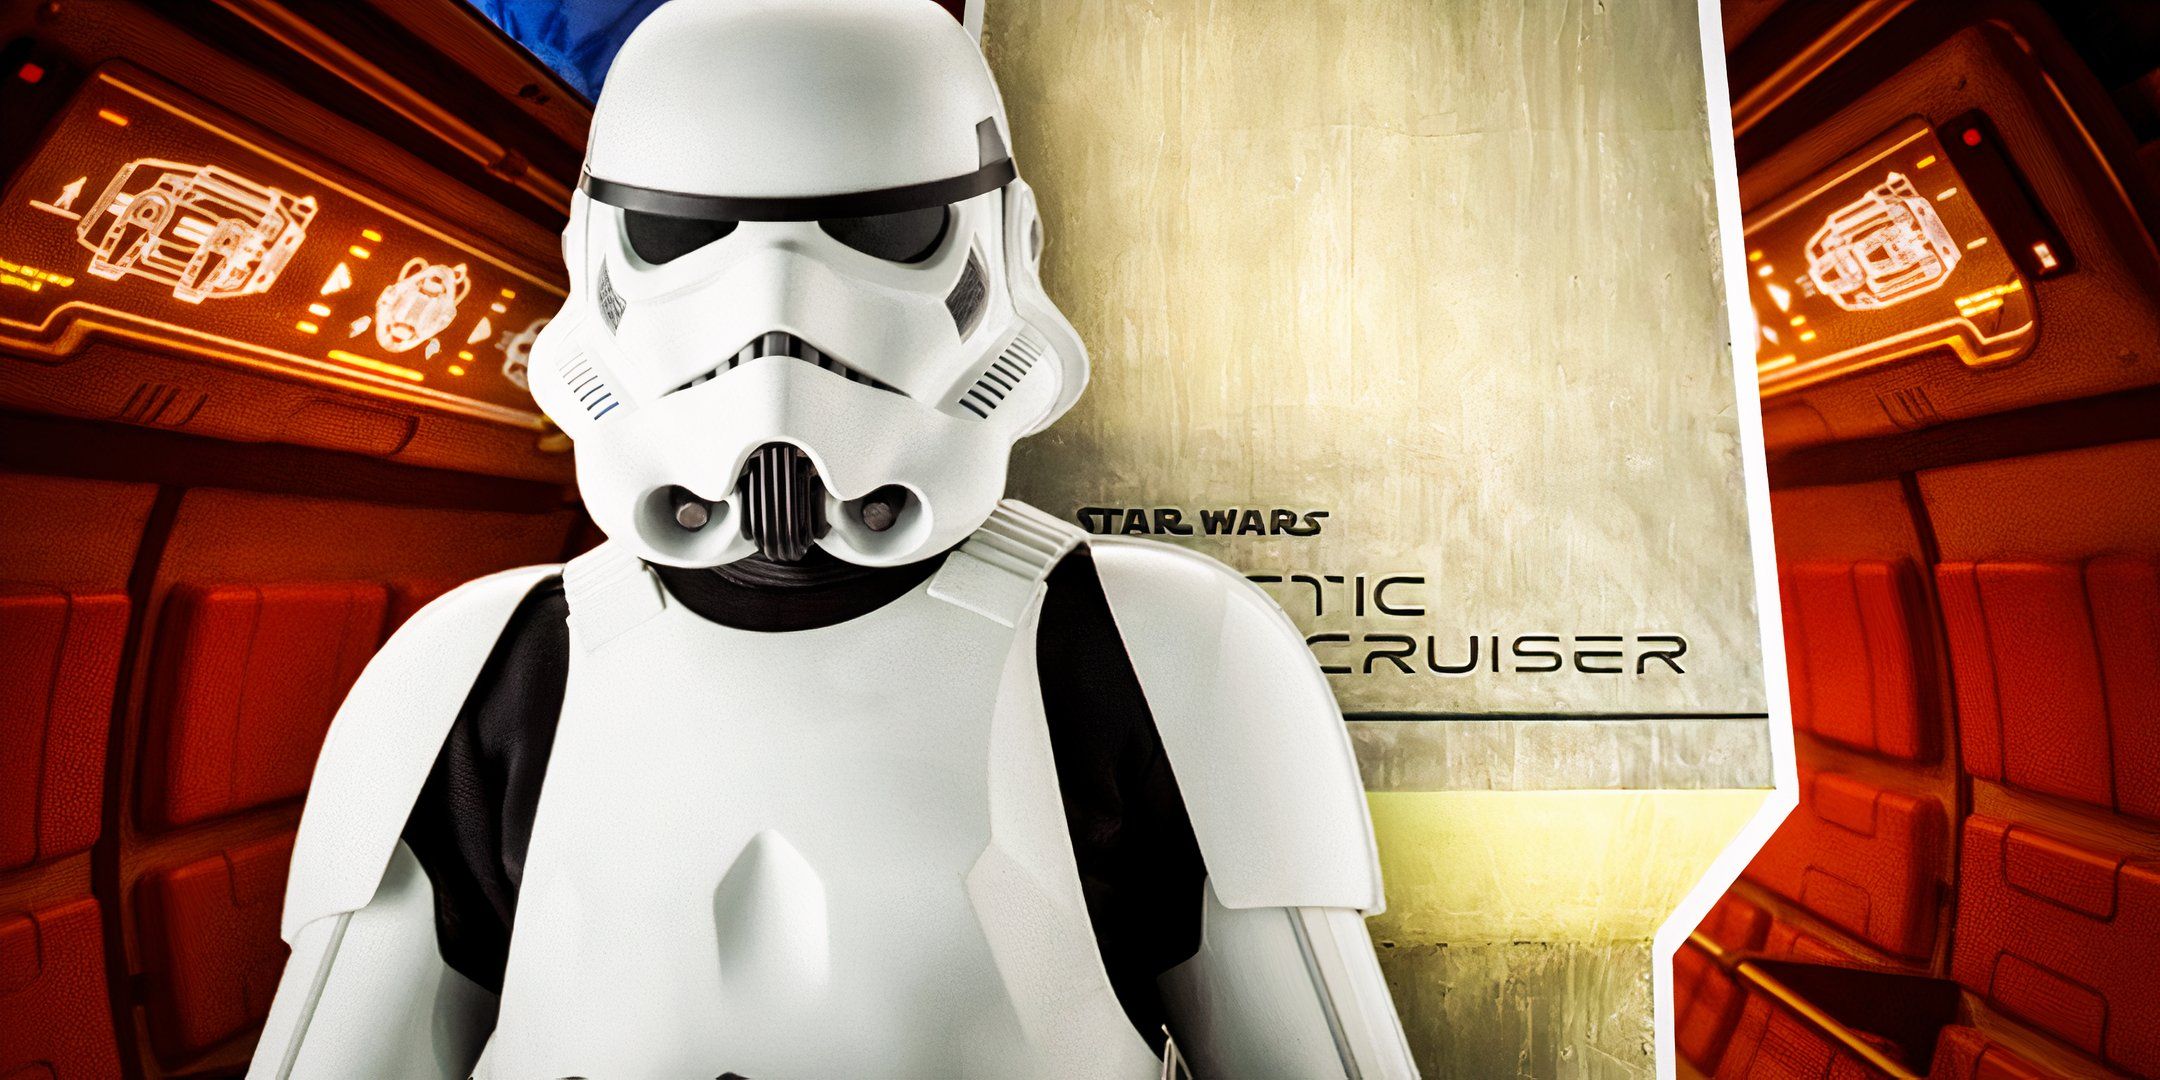 An Imperial stormtrooper edited over the Star Wars: Galactic Starcruiser sign and the launch pod interior